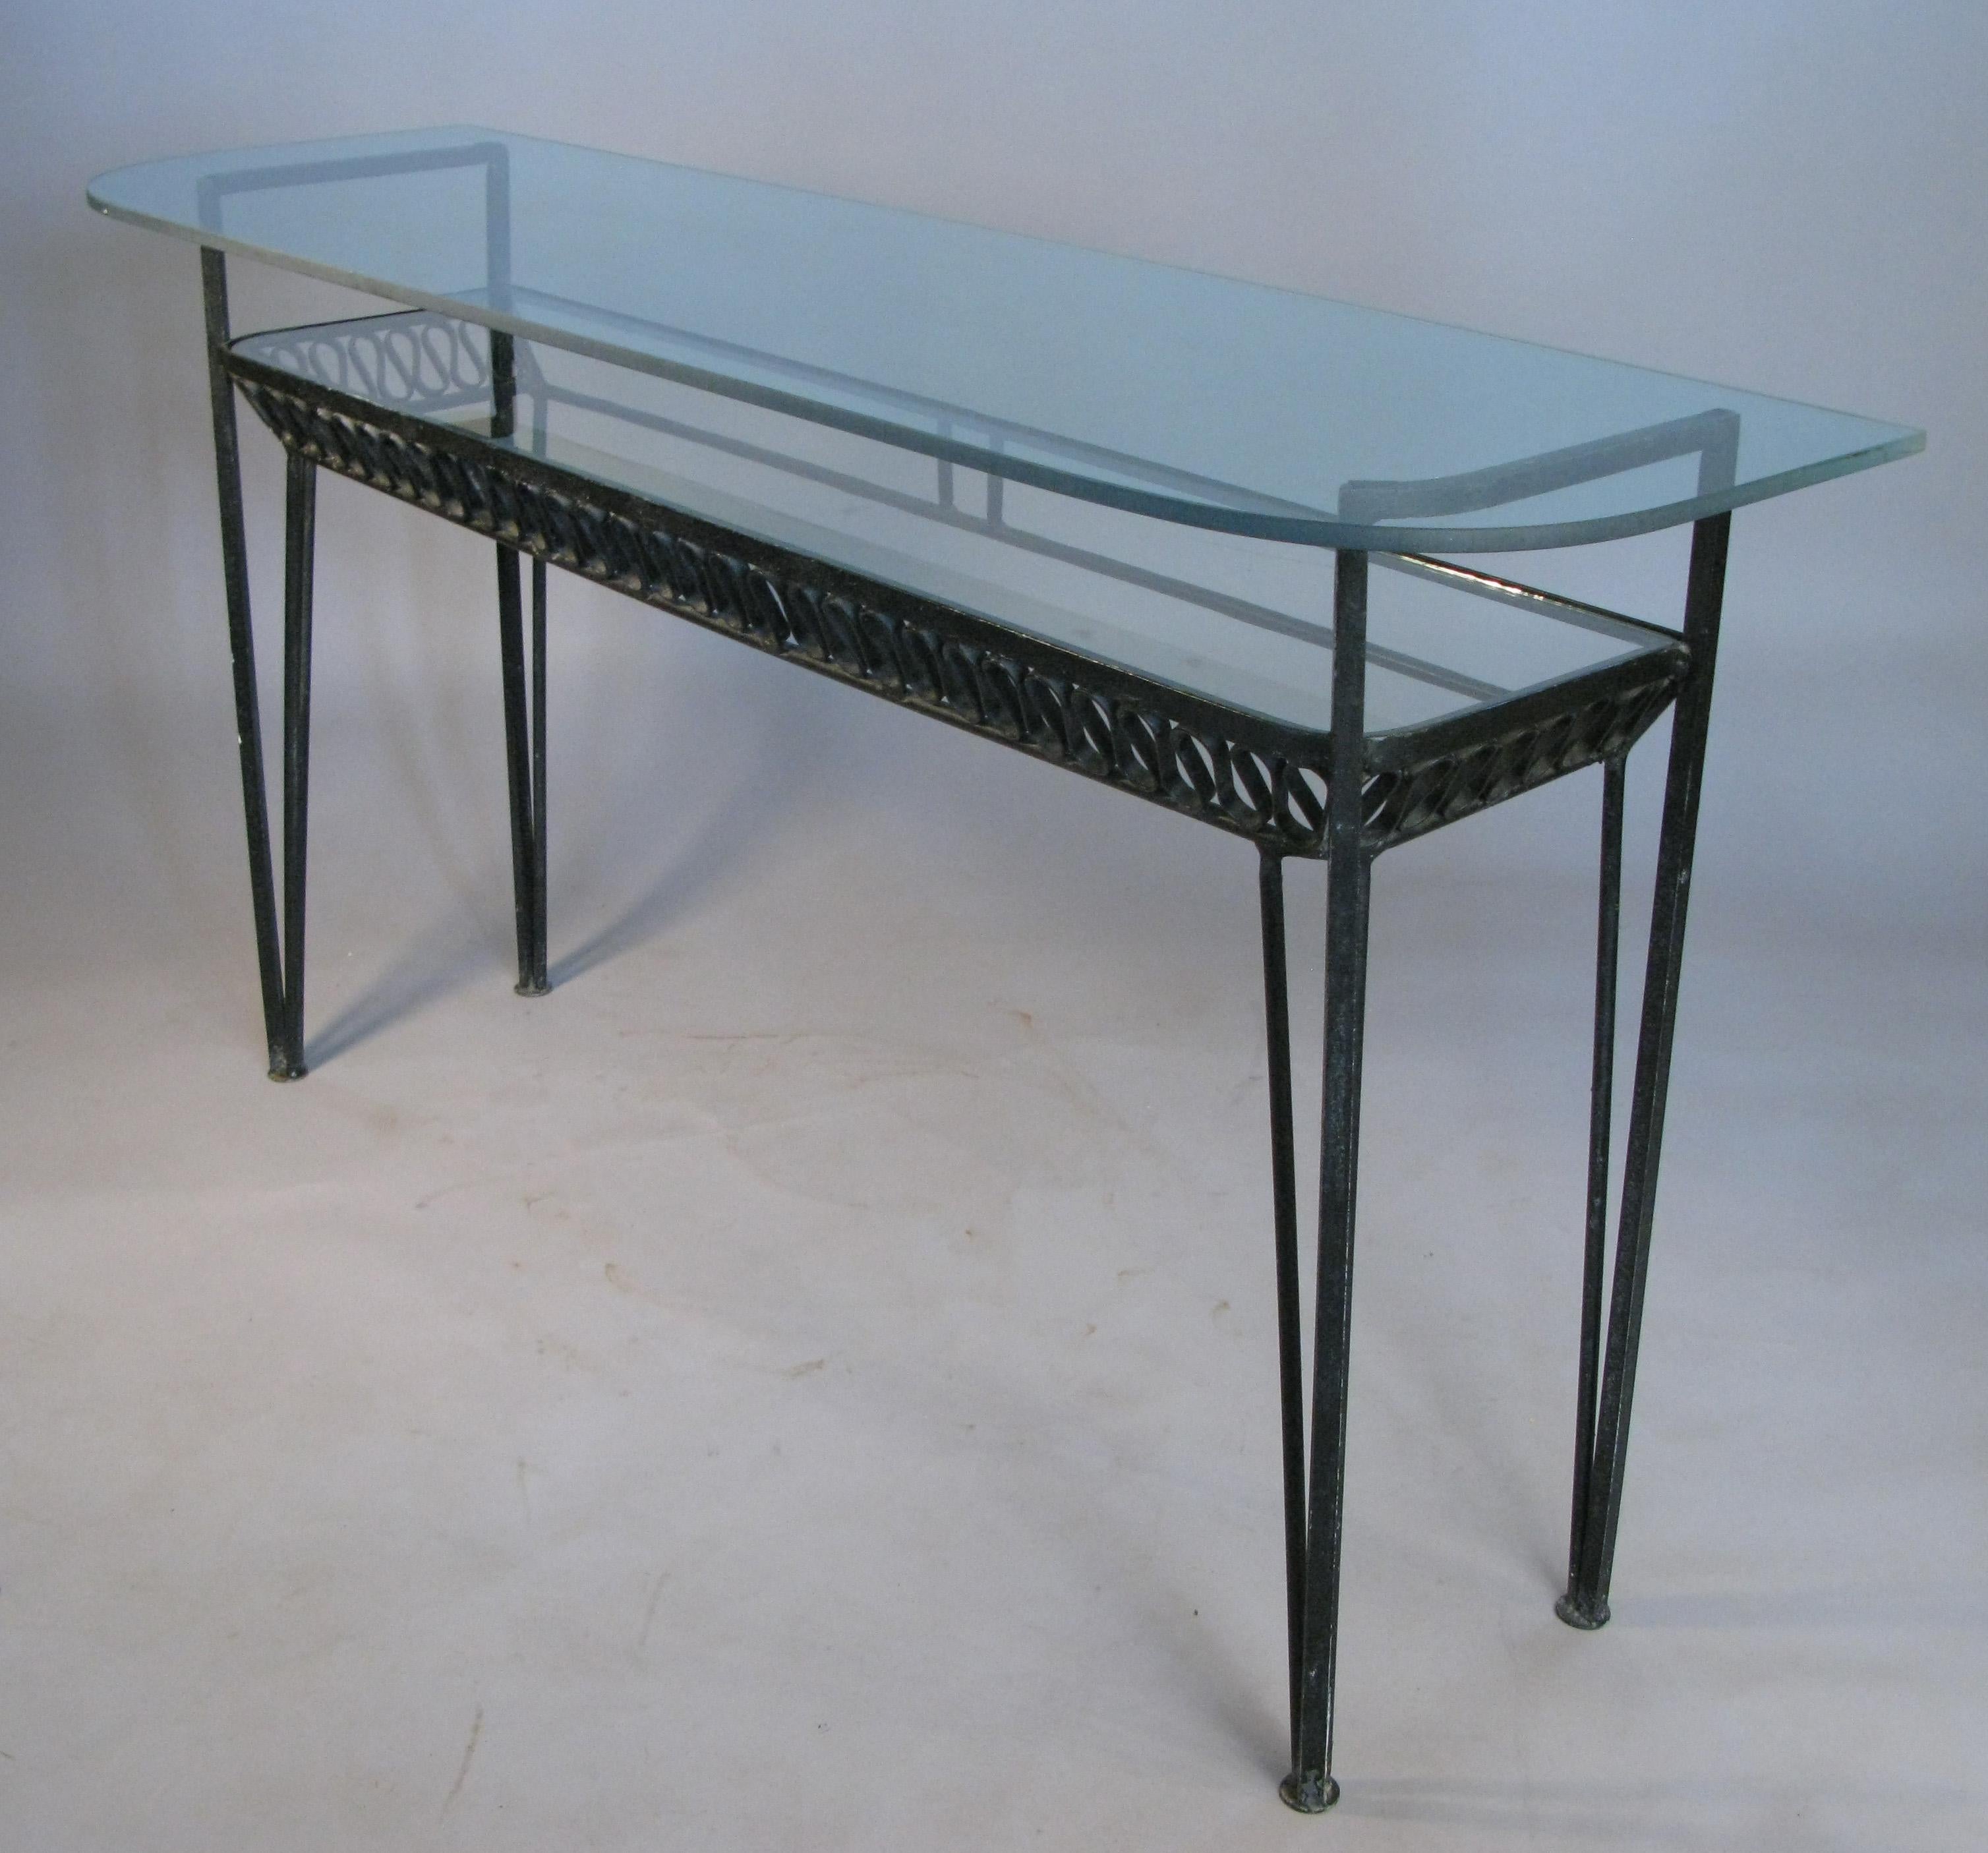 A rare 1950s wrought iron double shelf console table designed by Maurizio Tempestini for Salterini, with two long glass shelves and Tempestini's signature iron ribbon design under the lower shelf.